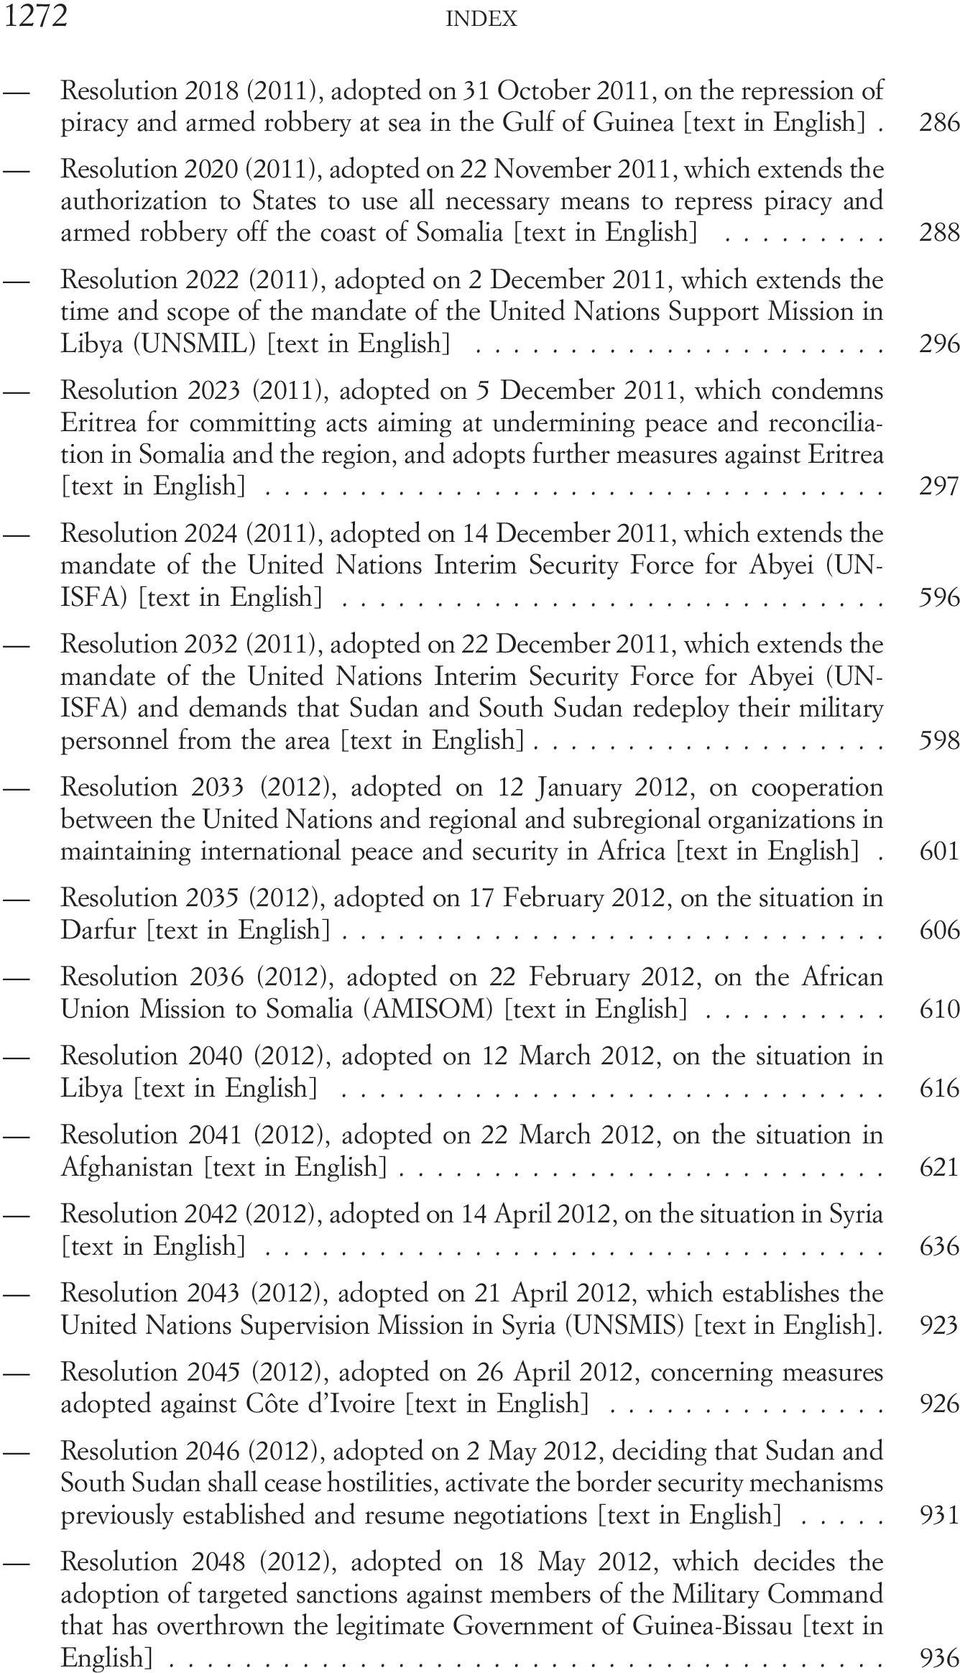 English]... 288 Resolution 2022 (2011), adopted on 2 December 2011, which extends the time and scope of the mandate of the United Nations Support Mission in Libya (UNSMIL) [text in English].